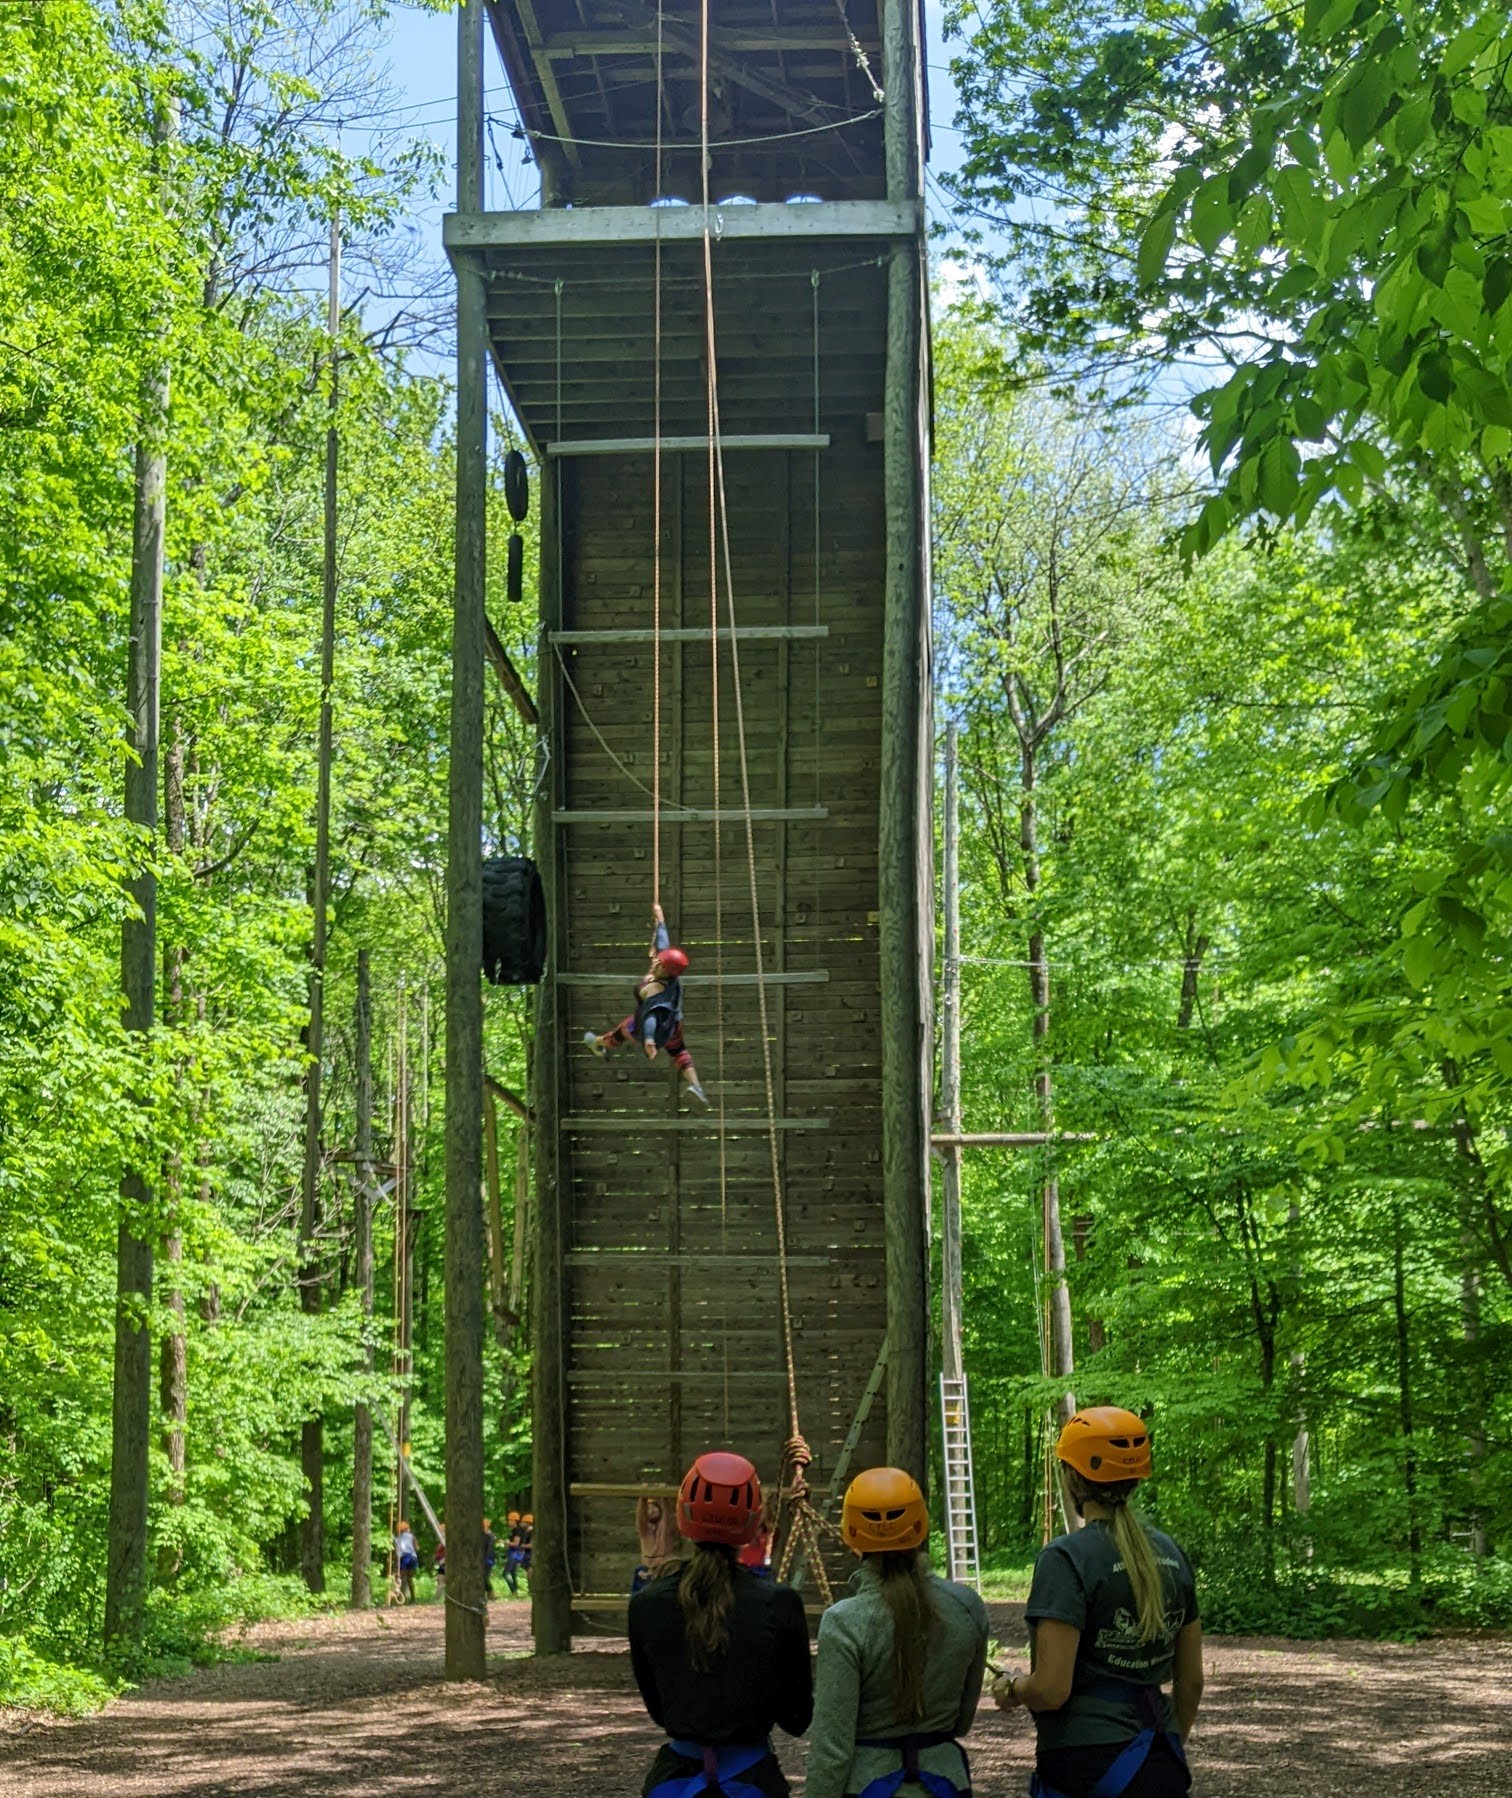 Participant descending from tower at ropes course, while being belayed by three people on the ground in the foreground of the image. 